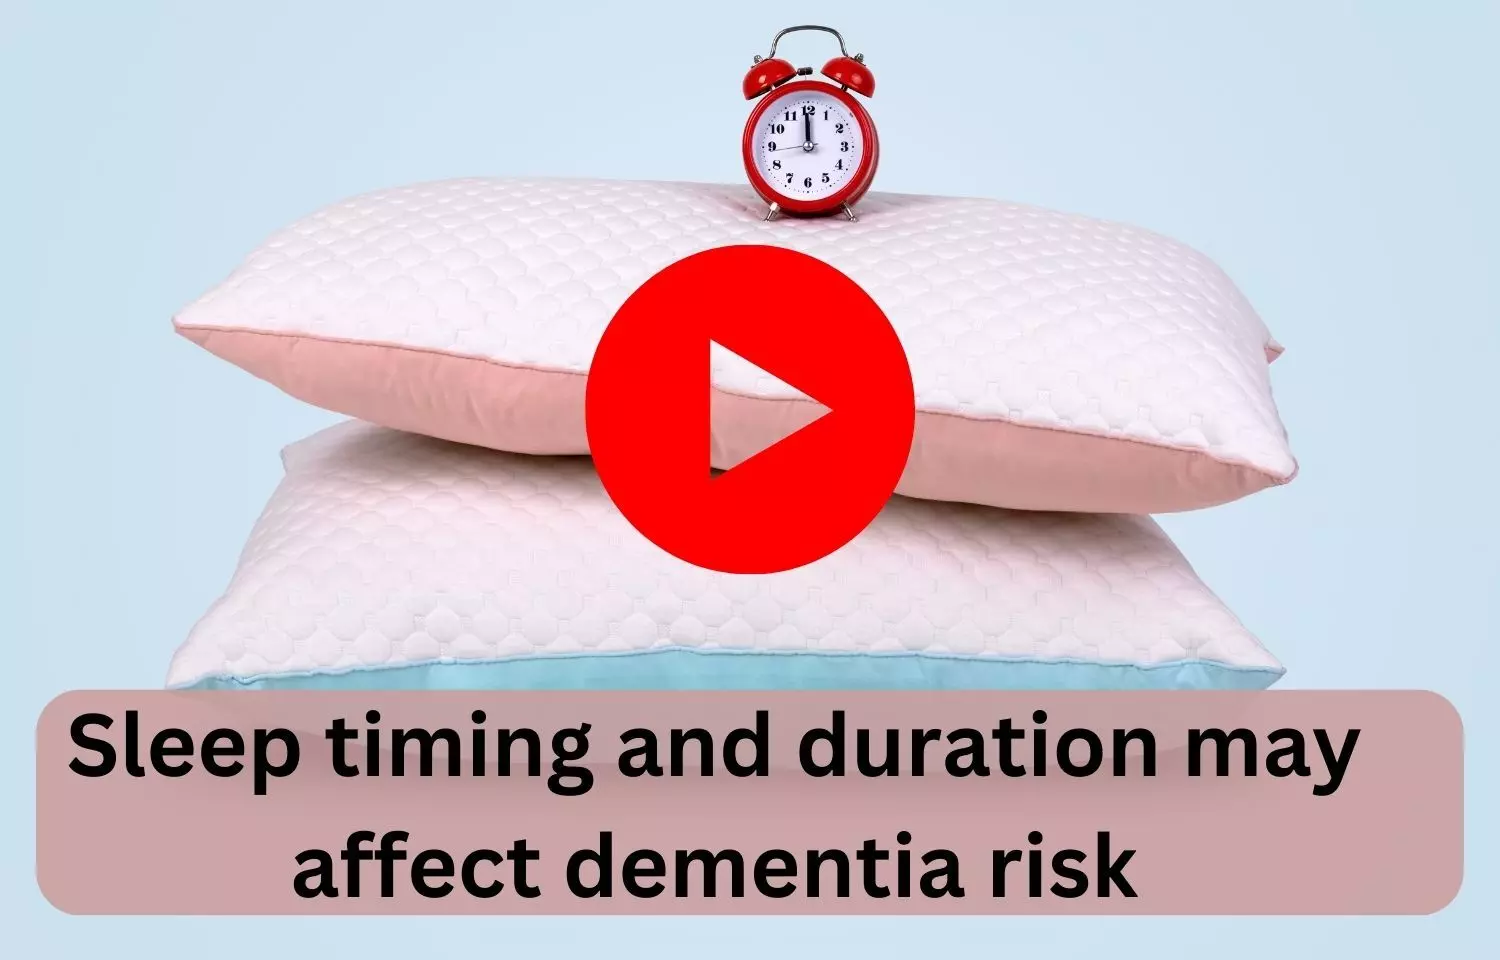 Sleep timing and duration may affect dementia risk